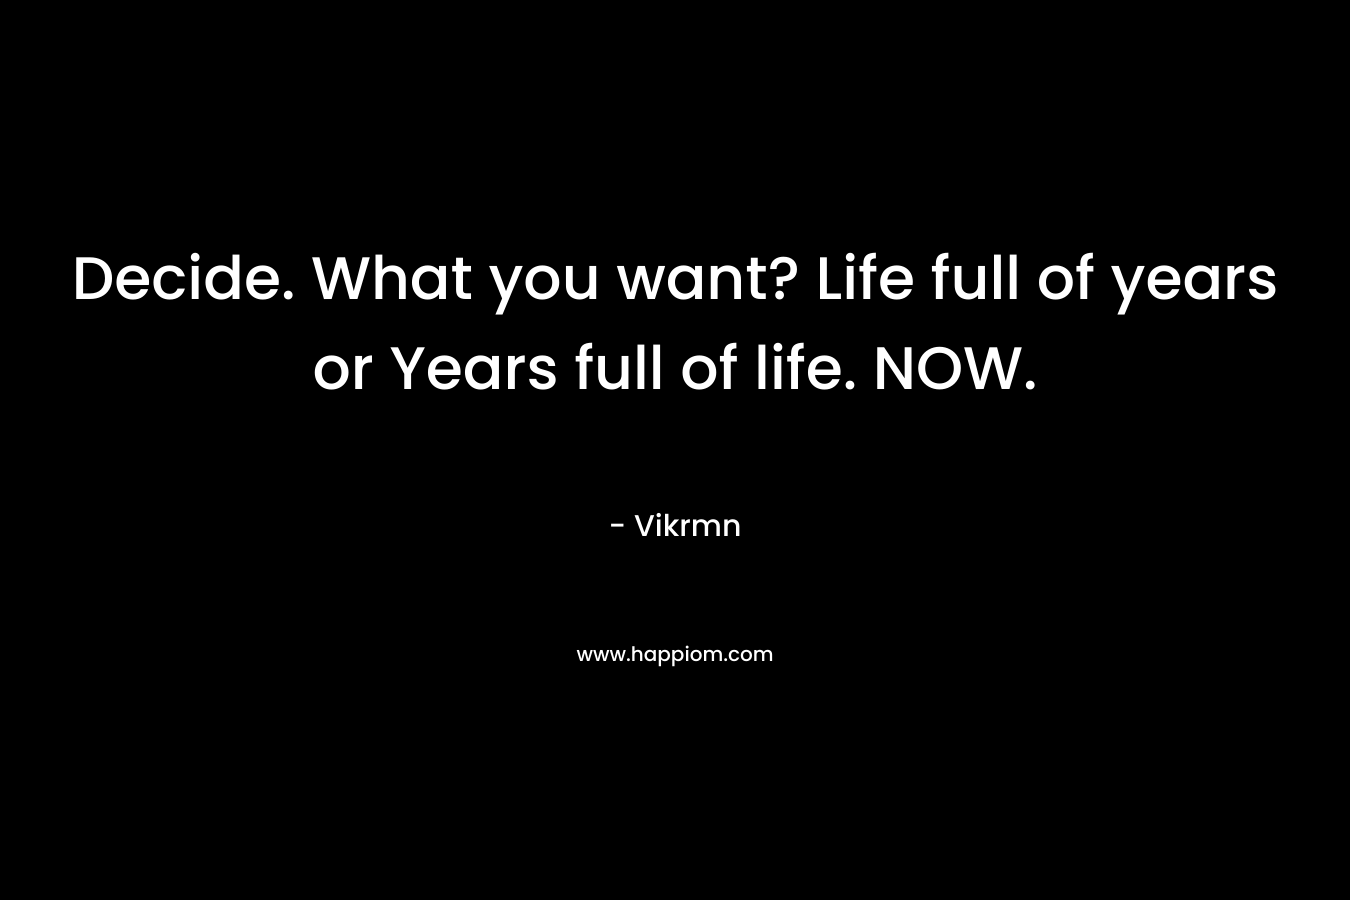 Decide. What you want? Life full of years or Years full of life. NOW.